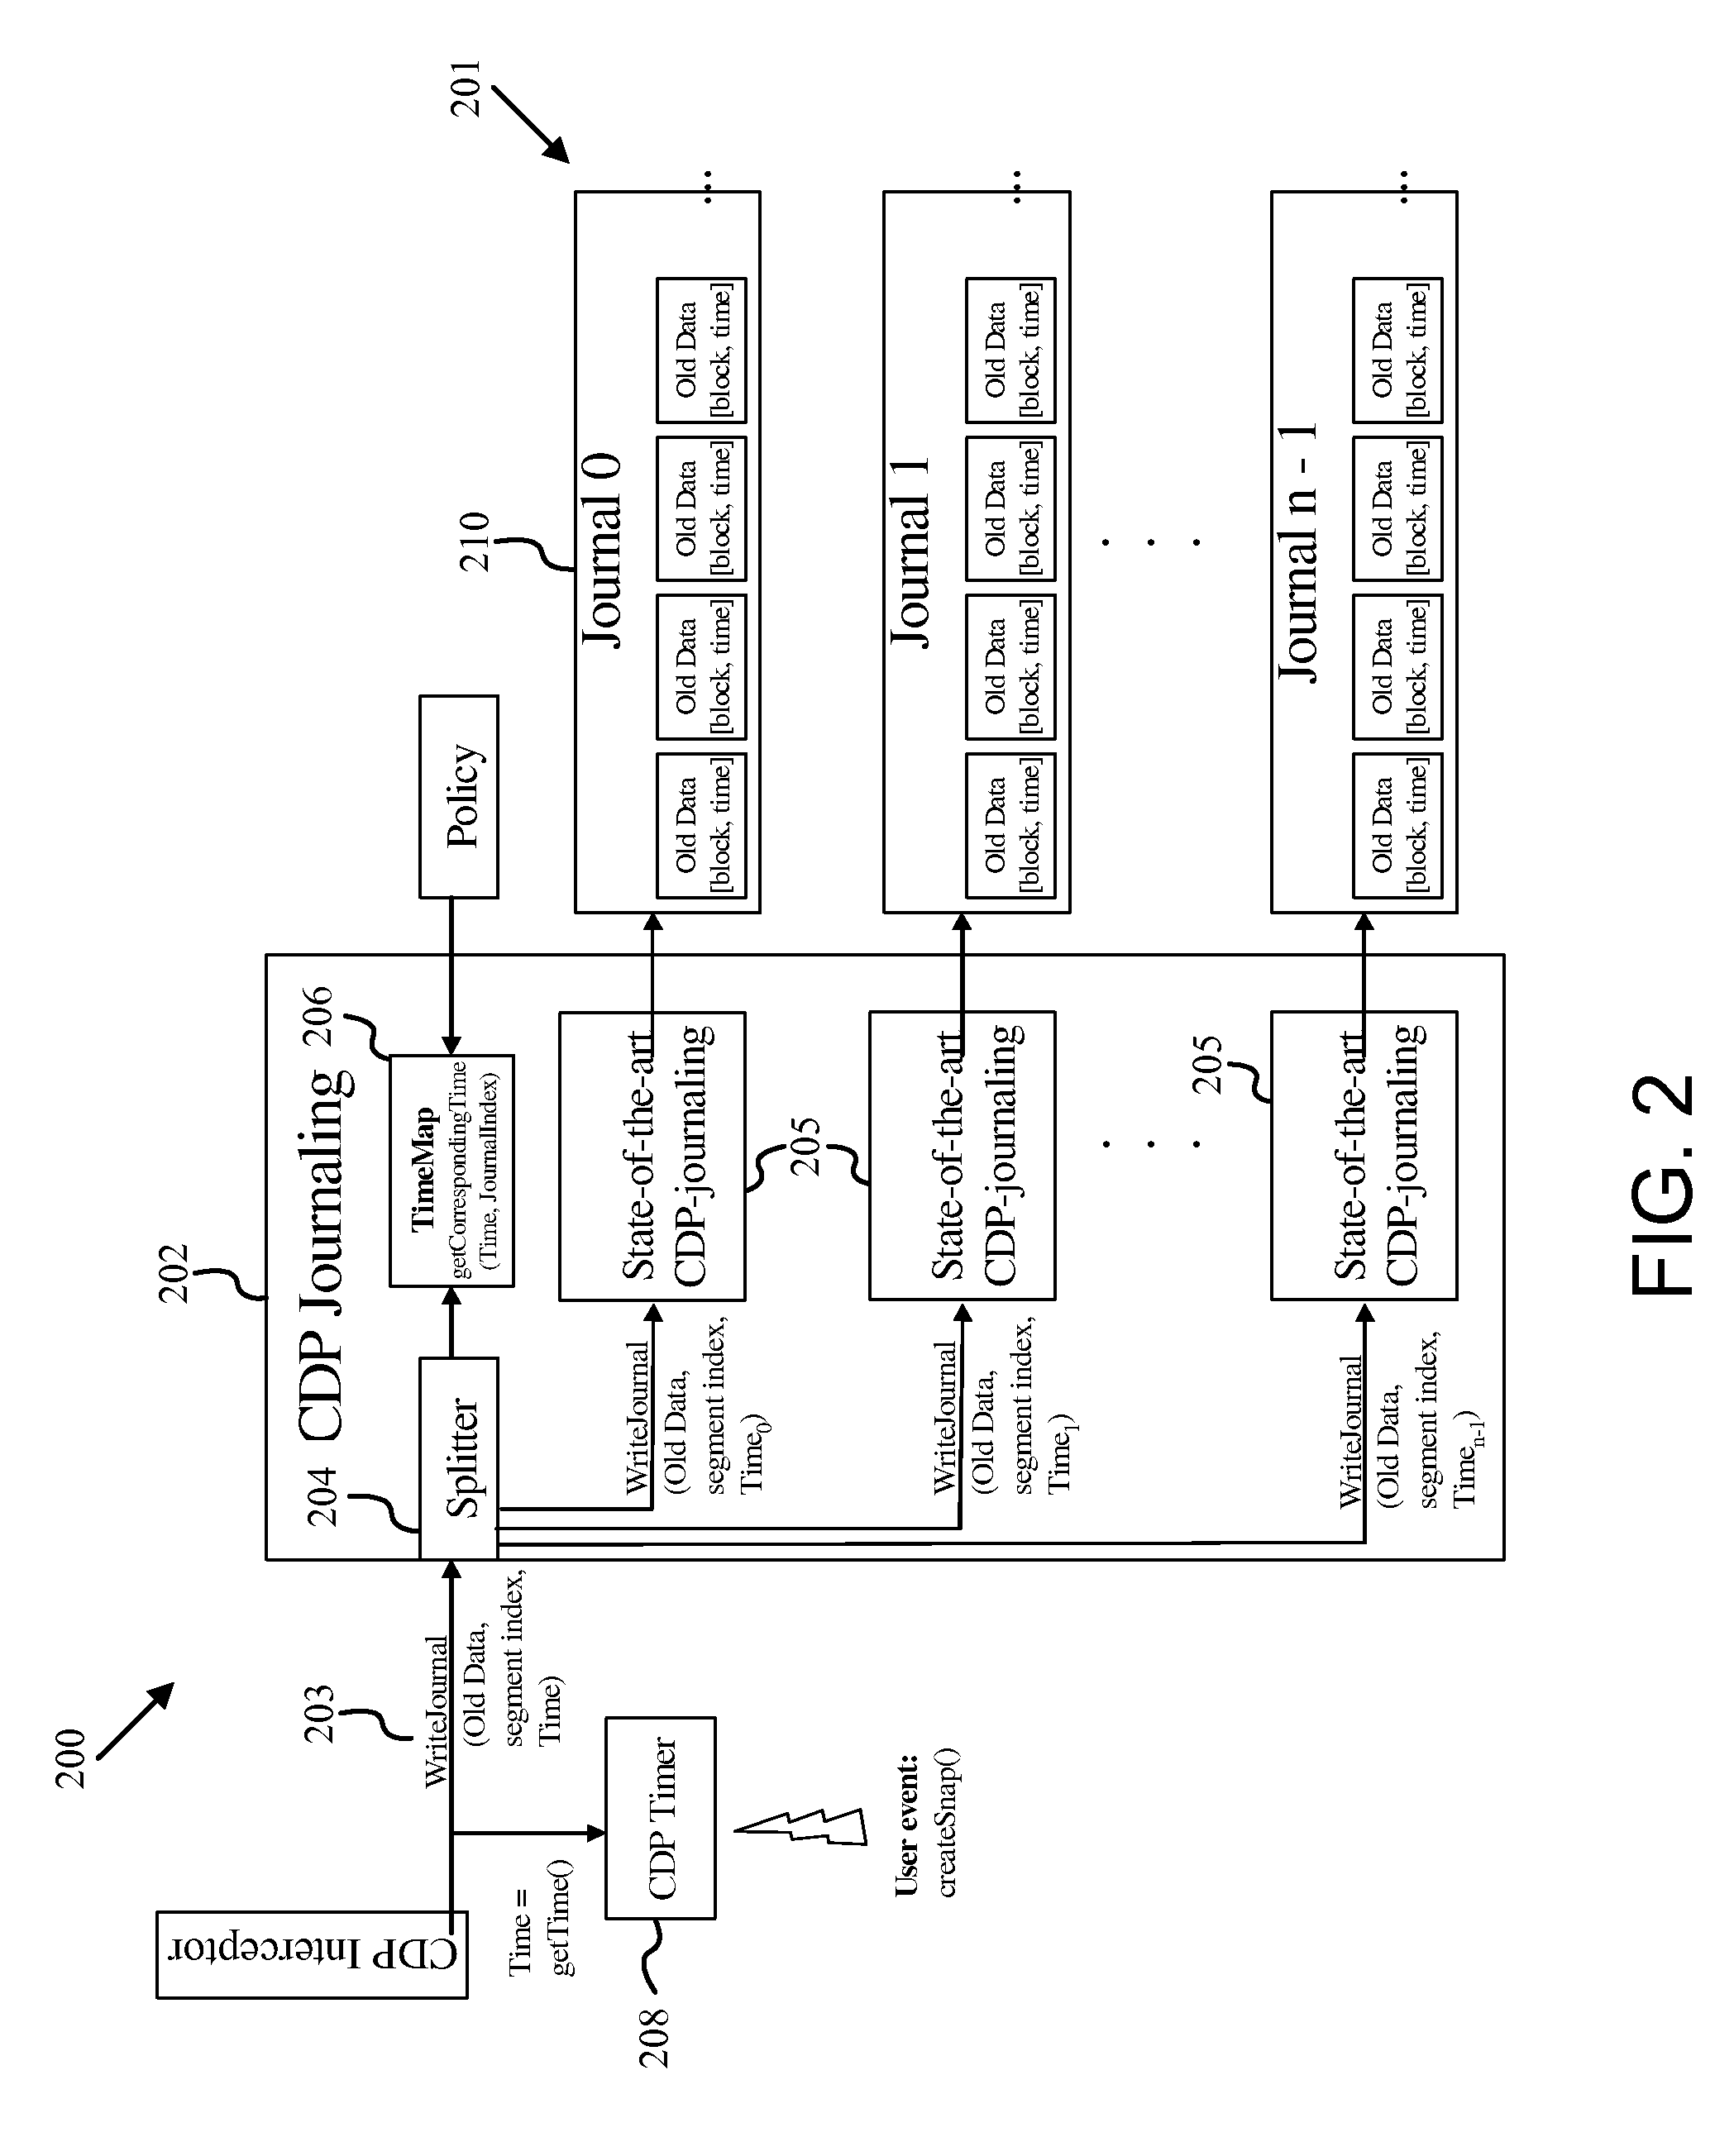 Methods and infrastructure for performing repetitive data protection and a corresponding restore of data